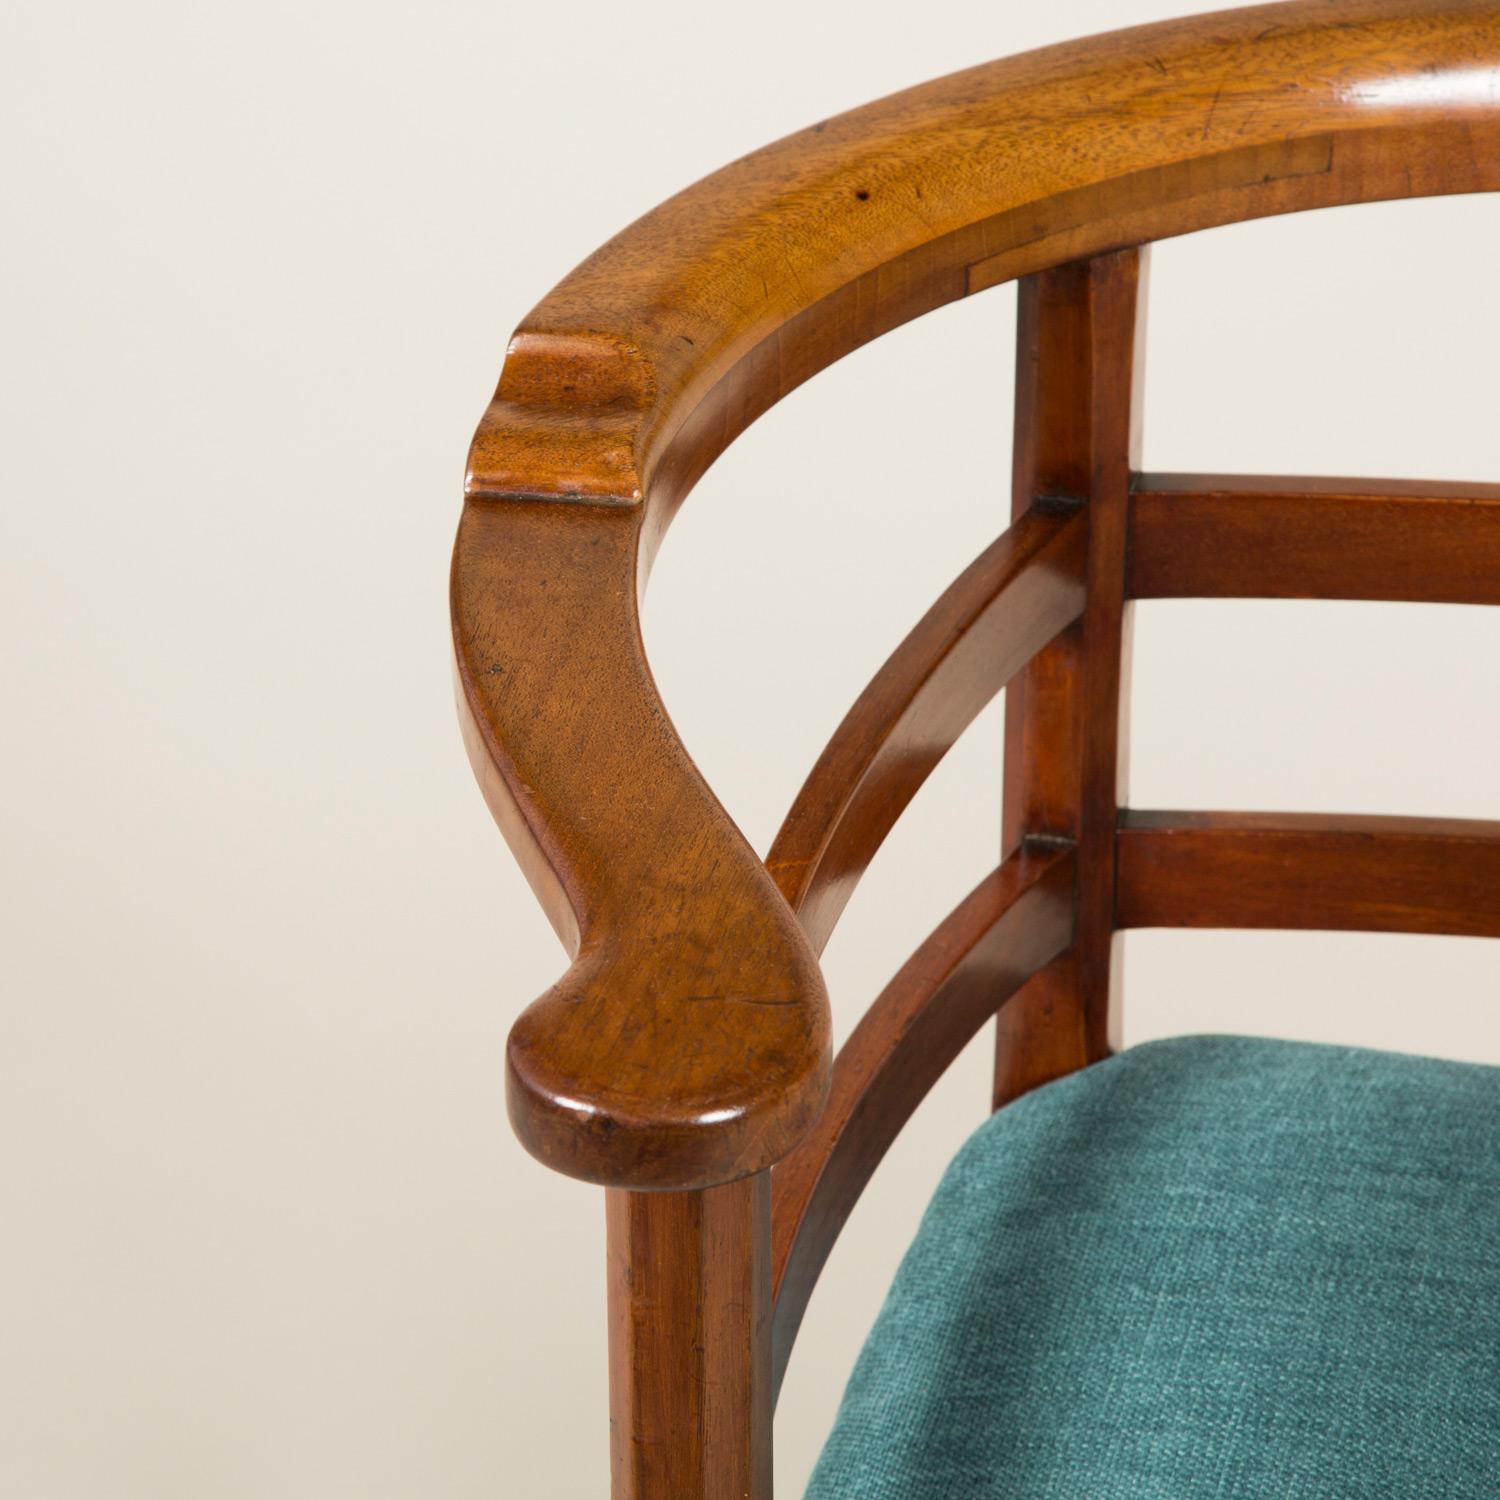 Early 19th Century Walnut Corner Chair with Simple Horizontal Back-Splats For Sale 1